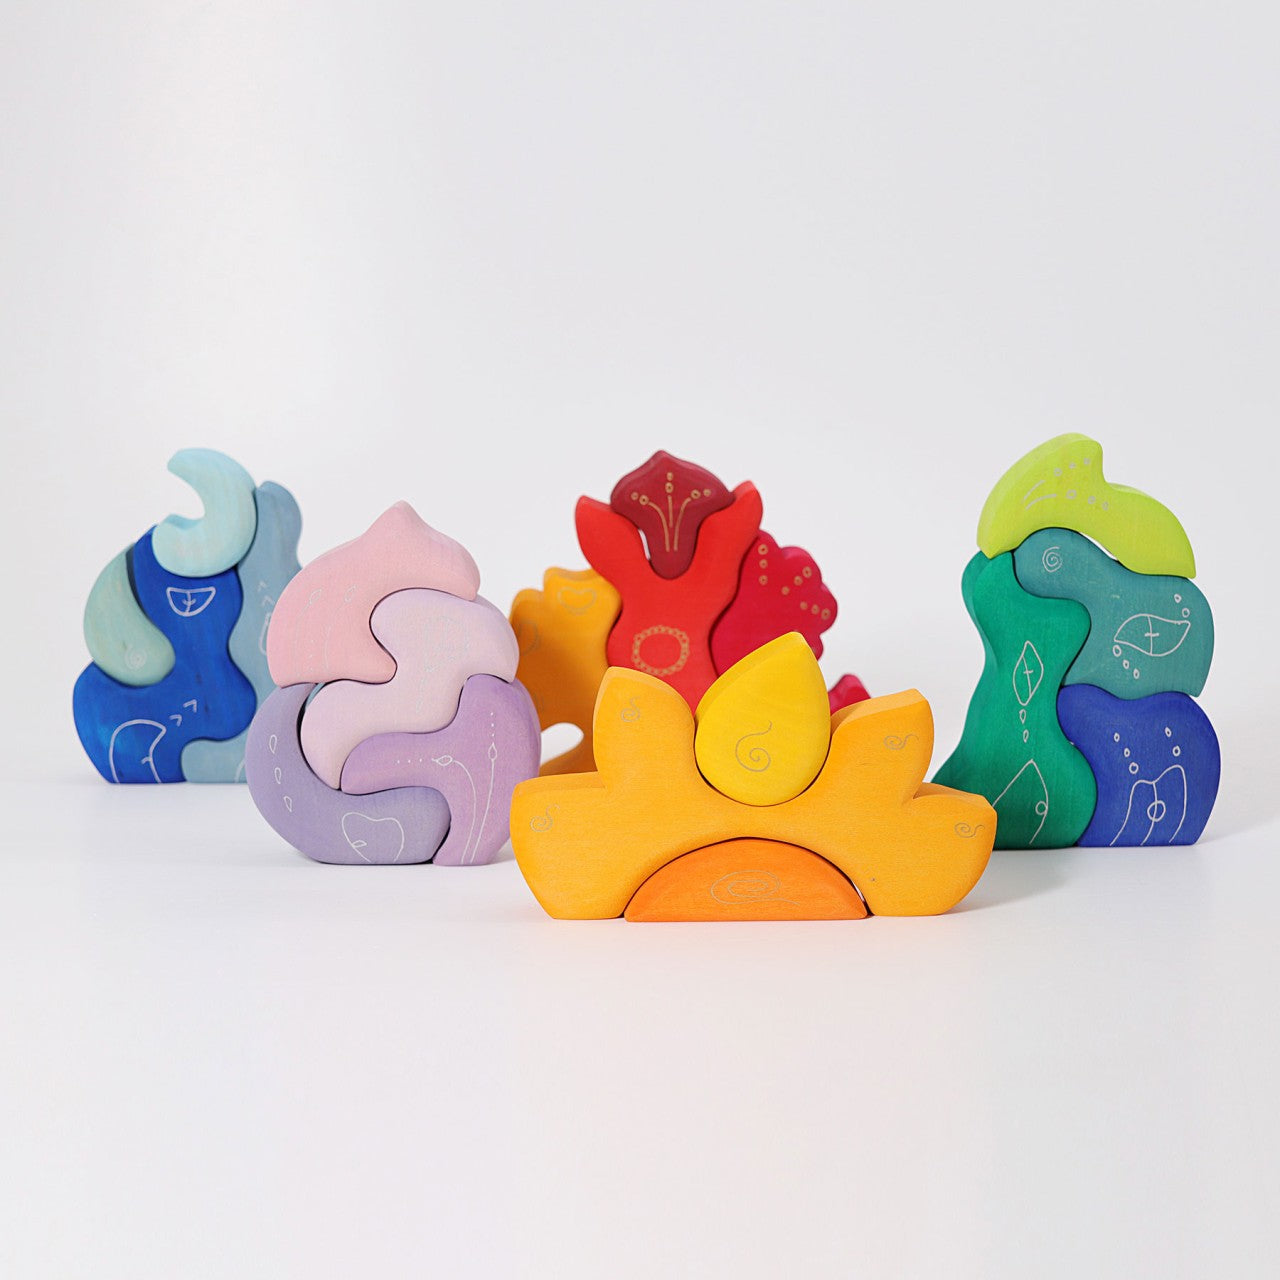 Casa Luna | 4 Pieces | Wooden Toys for Kids | Open-Ended Play